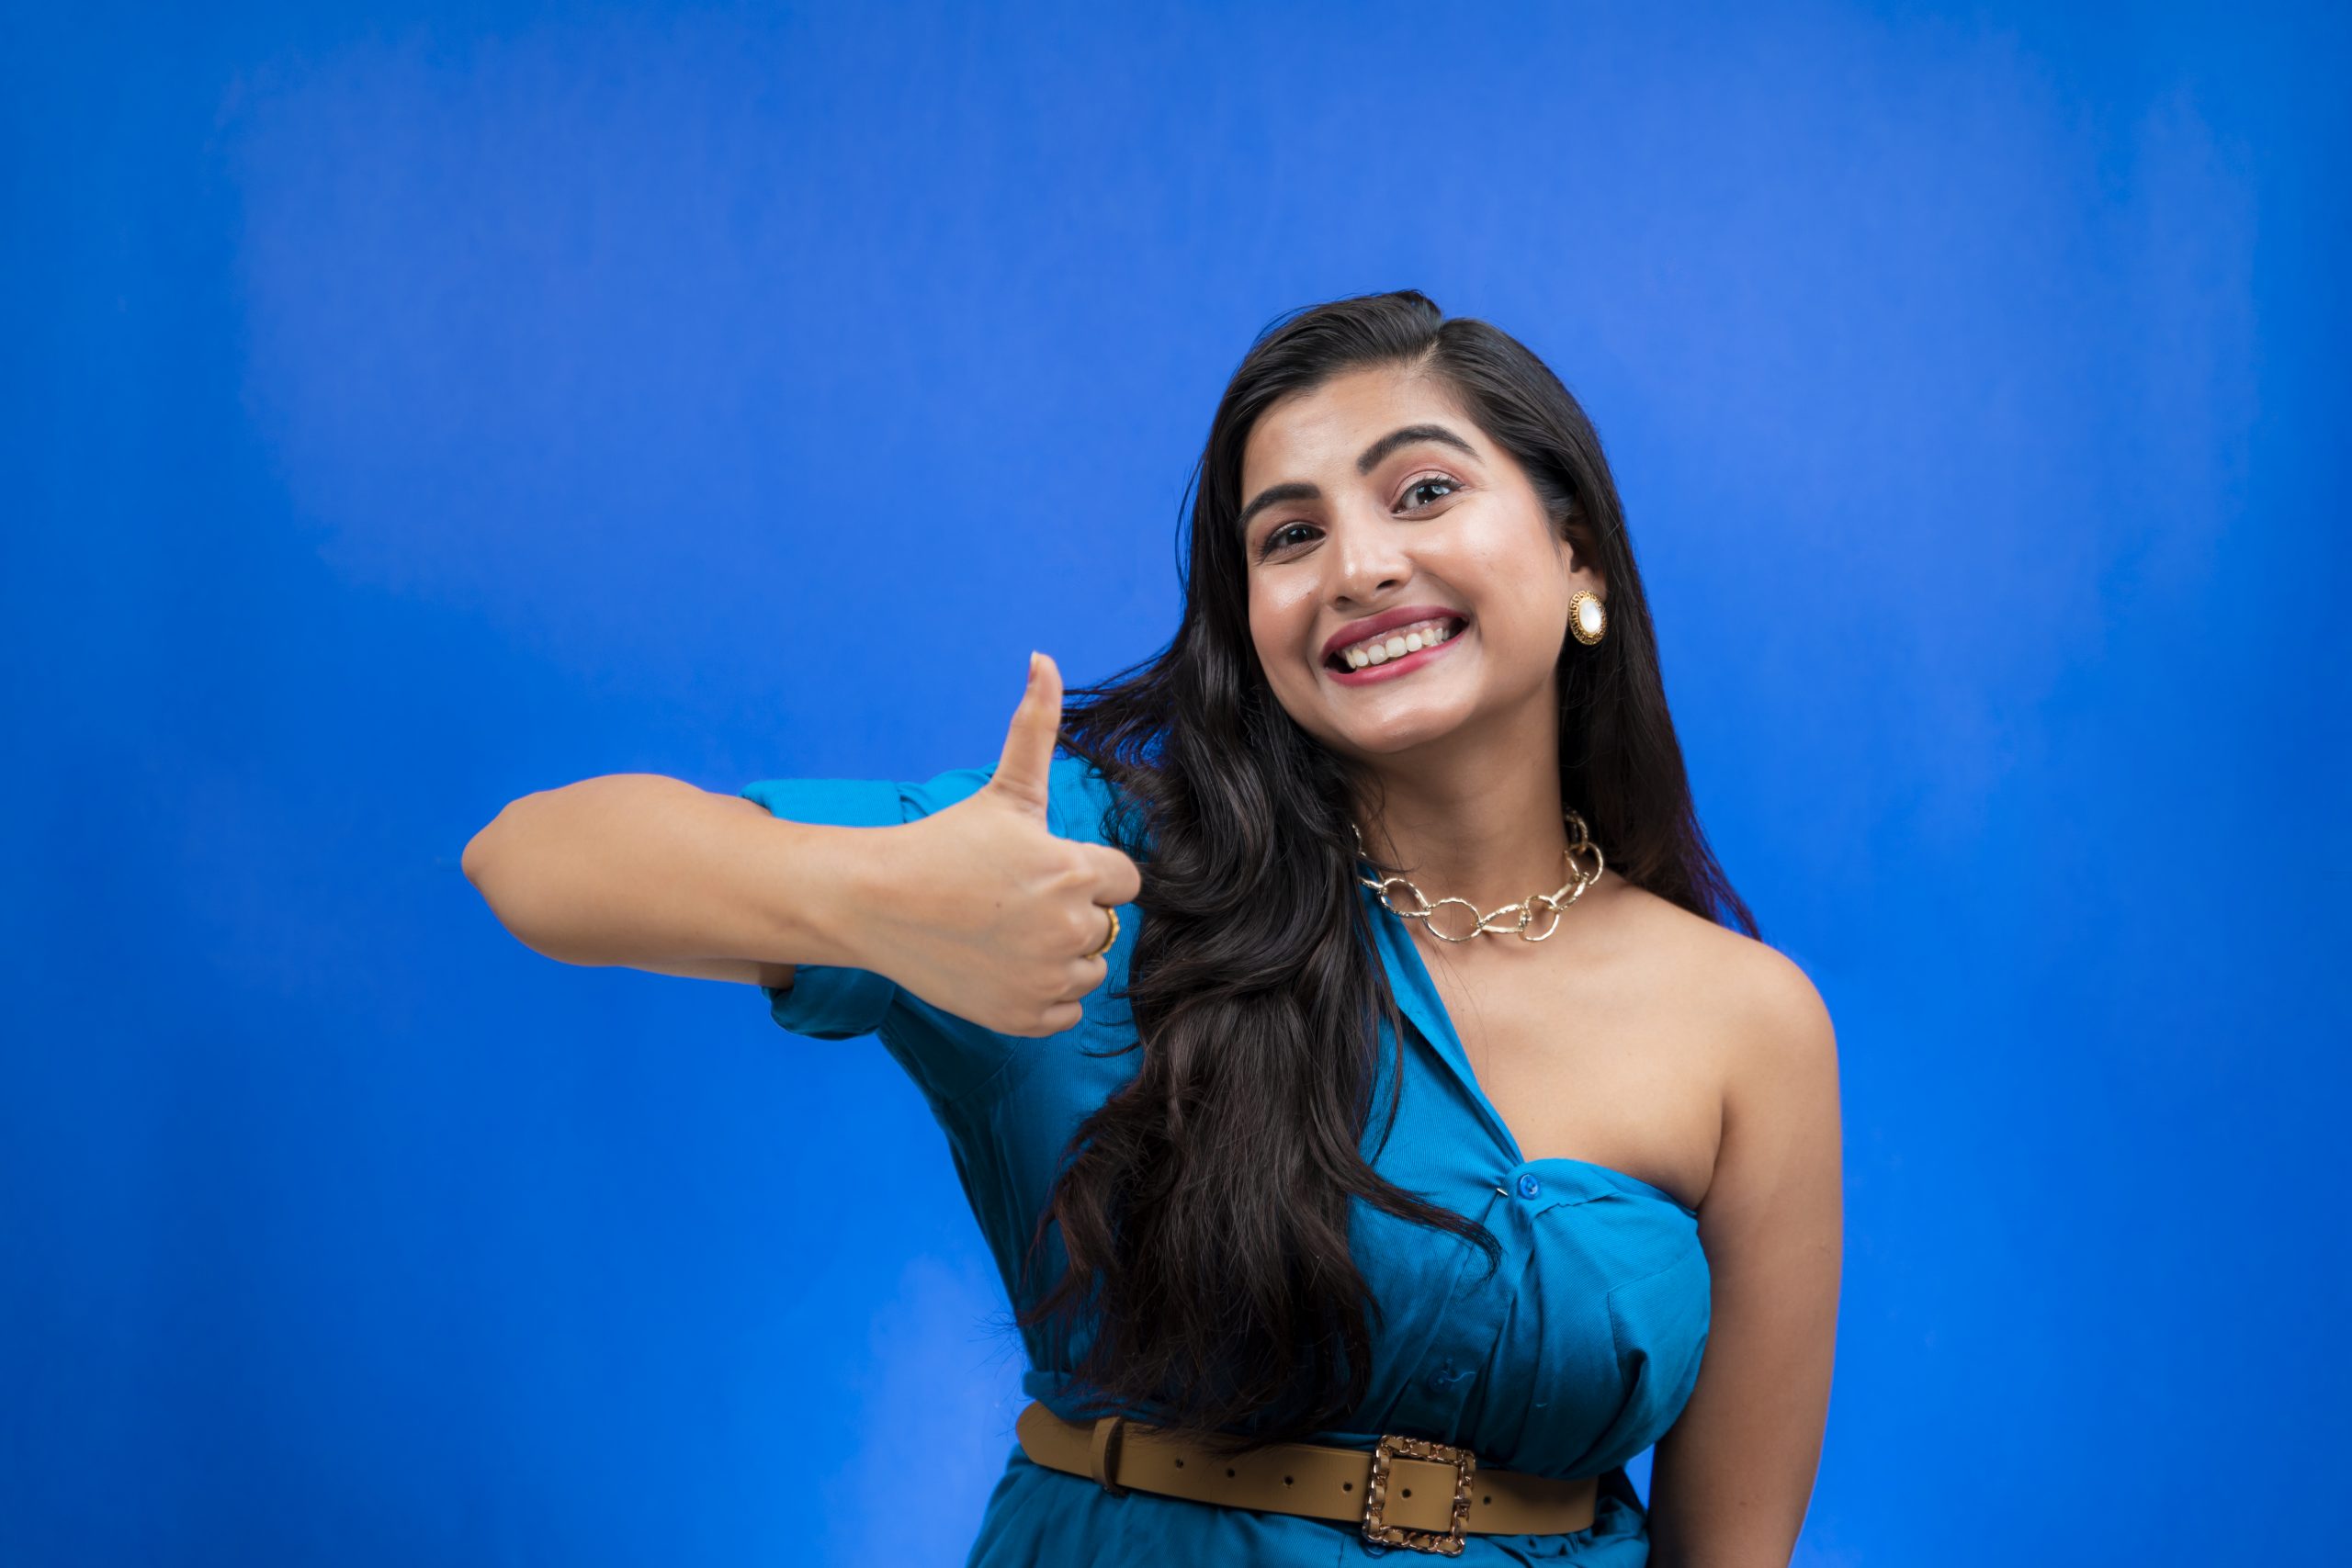 Young Cheerful Woman Smiling and Showing Thumbs Up